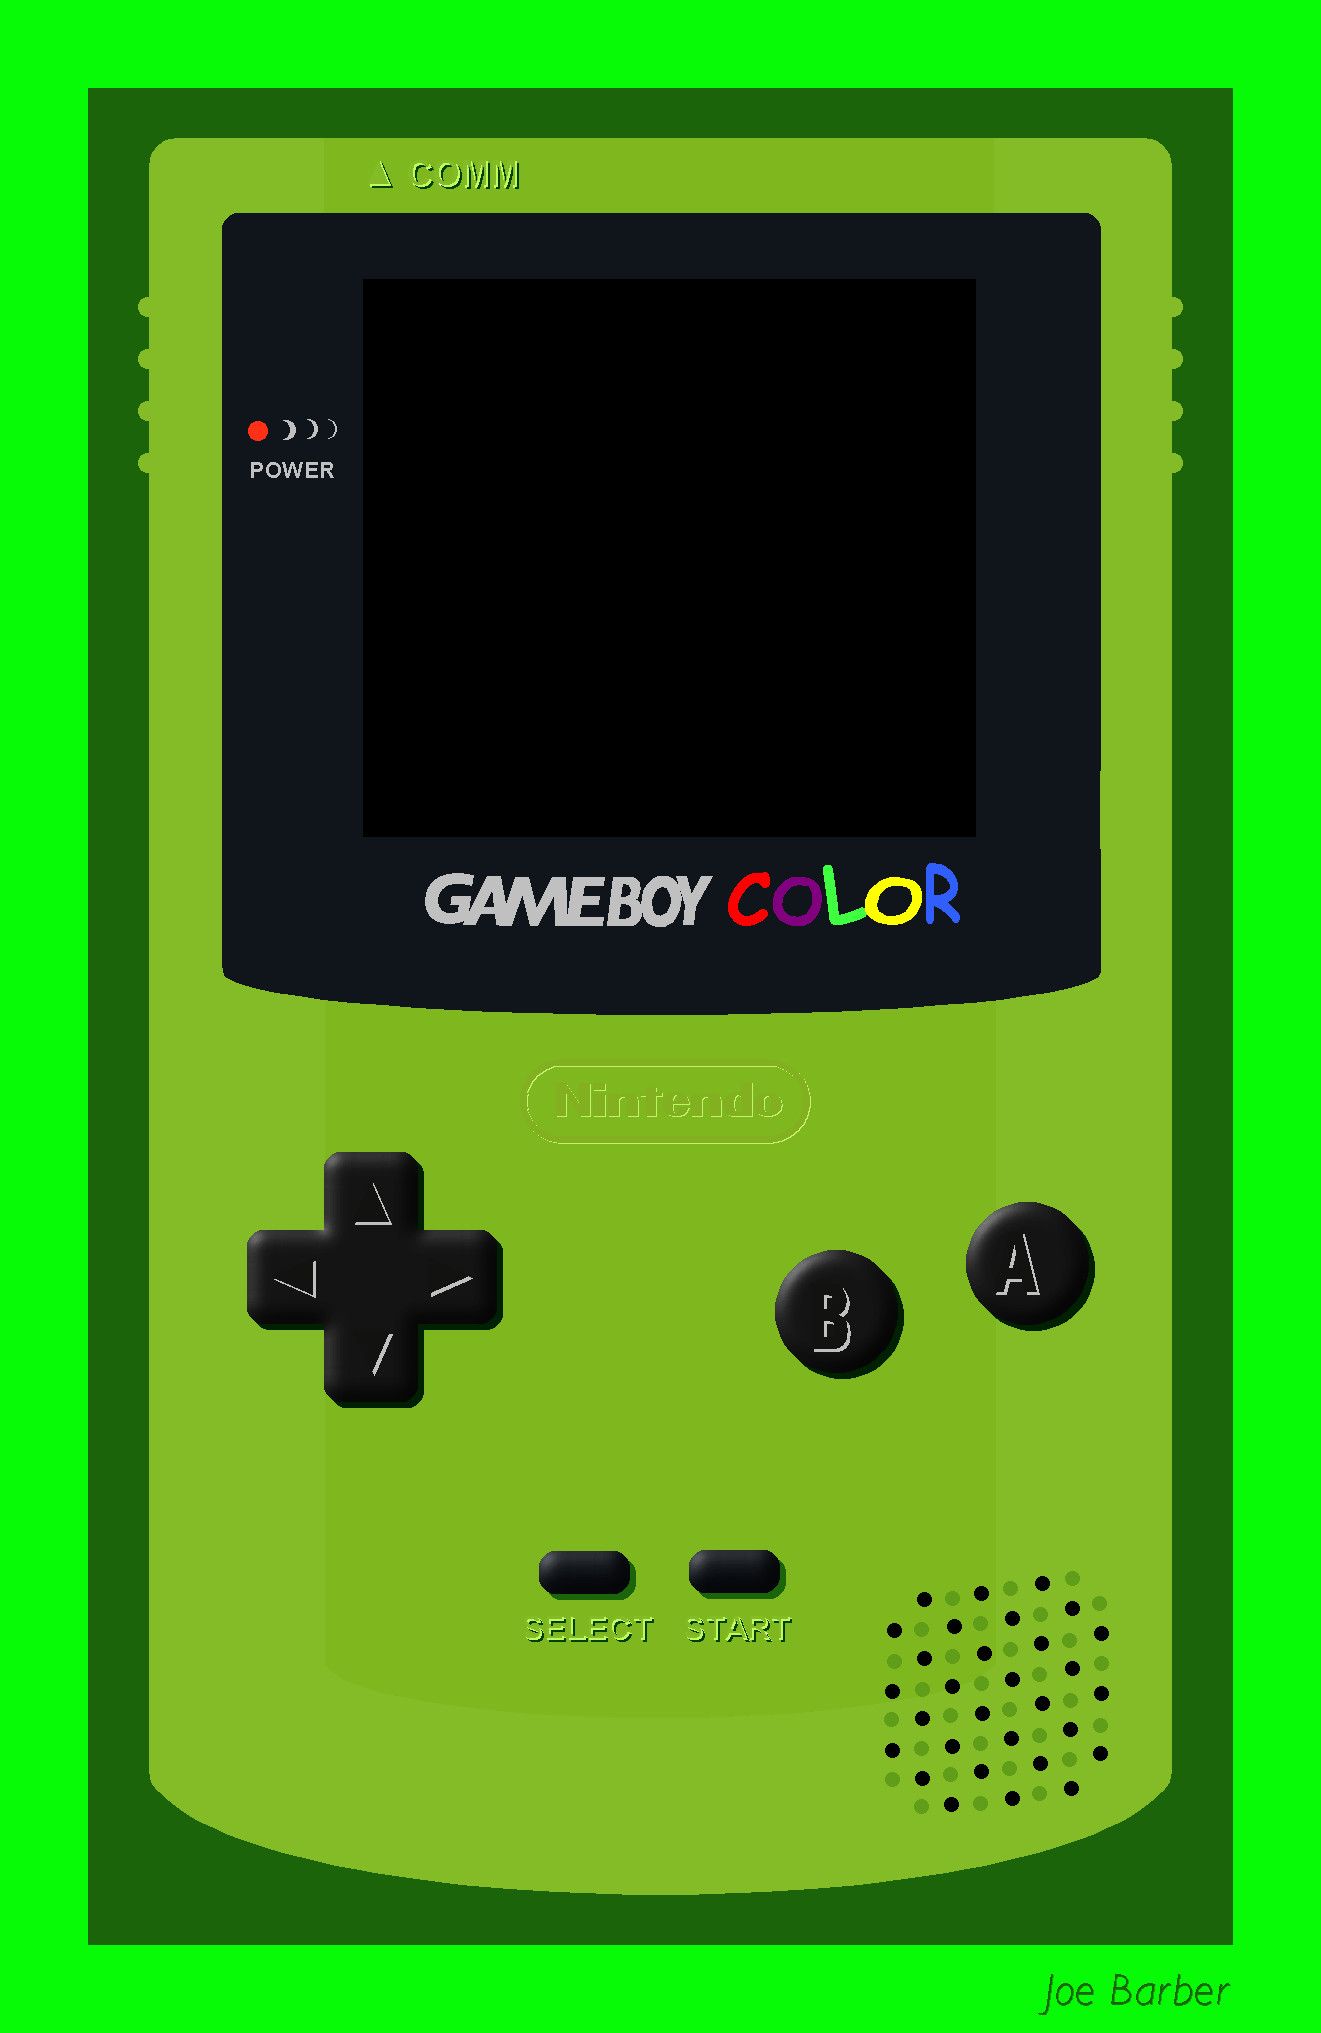 Game Boy Iphone Wallpapers 4k Hd Game Boy Iphone Backgrounds On Wallpaperbat